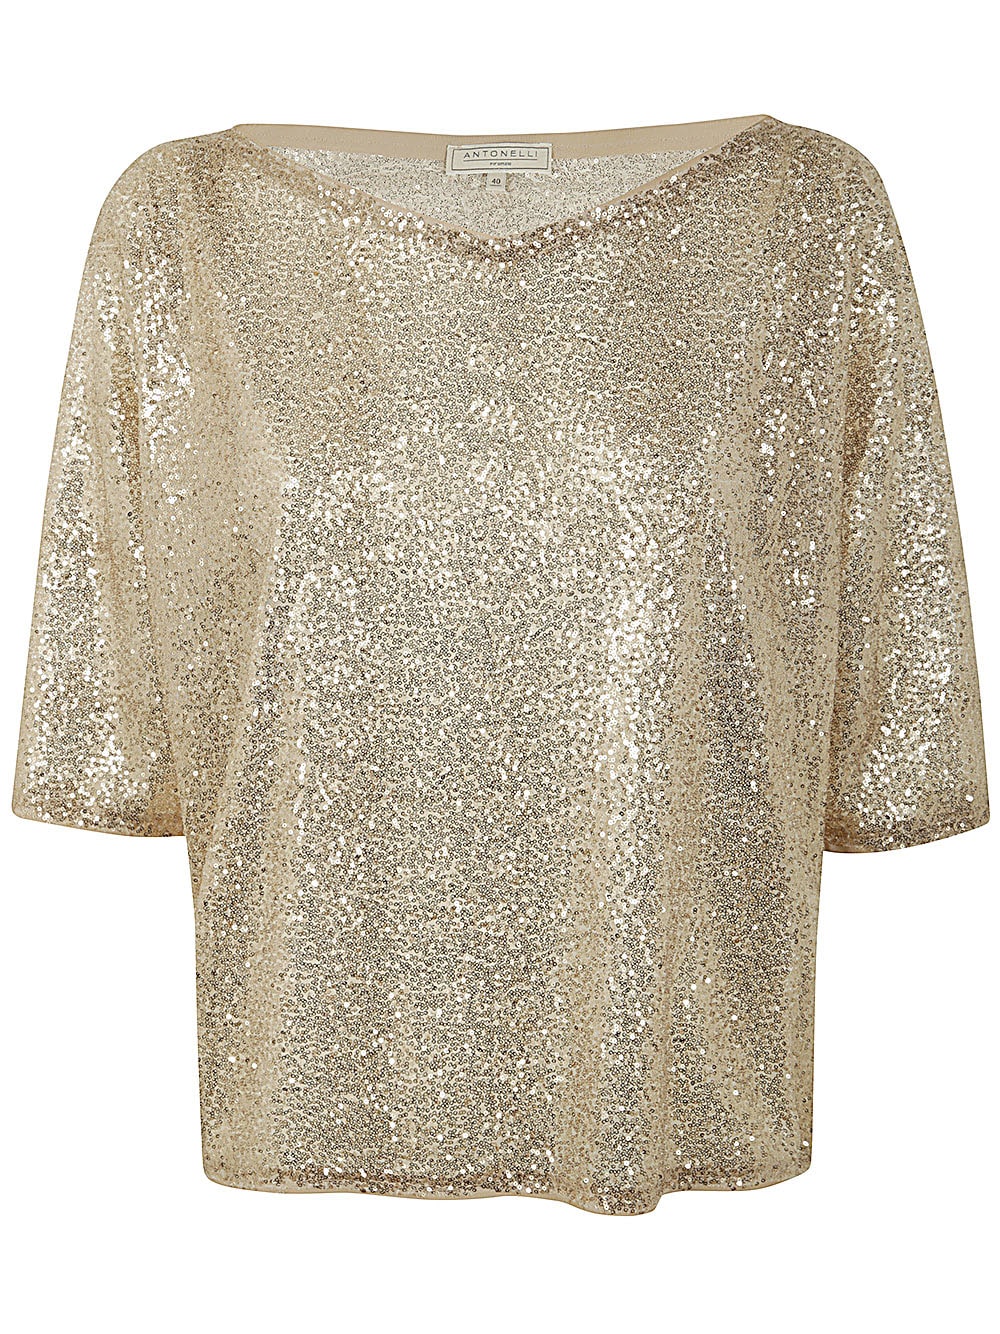 Antonelli Duncan Jacket With Paillettes In Gold